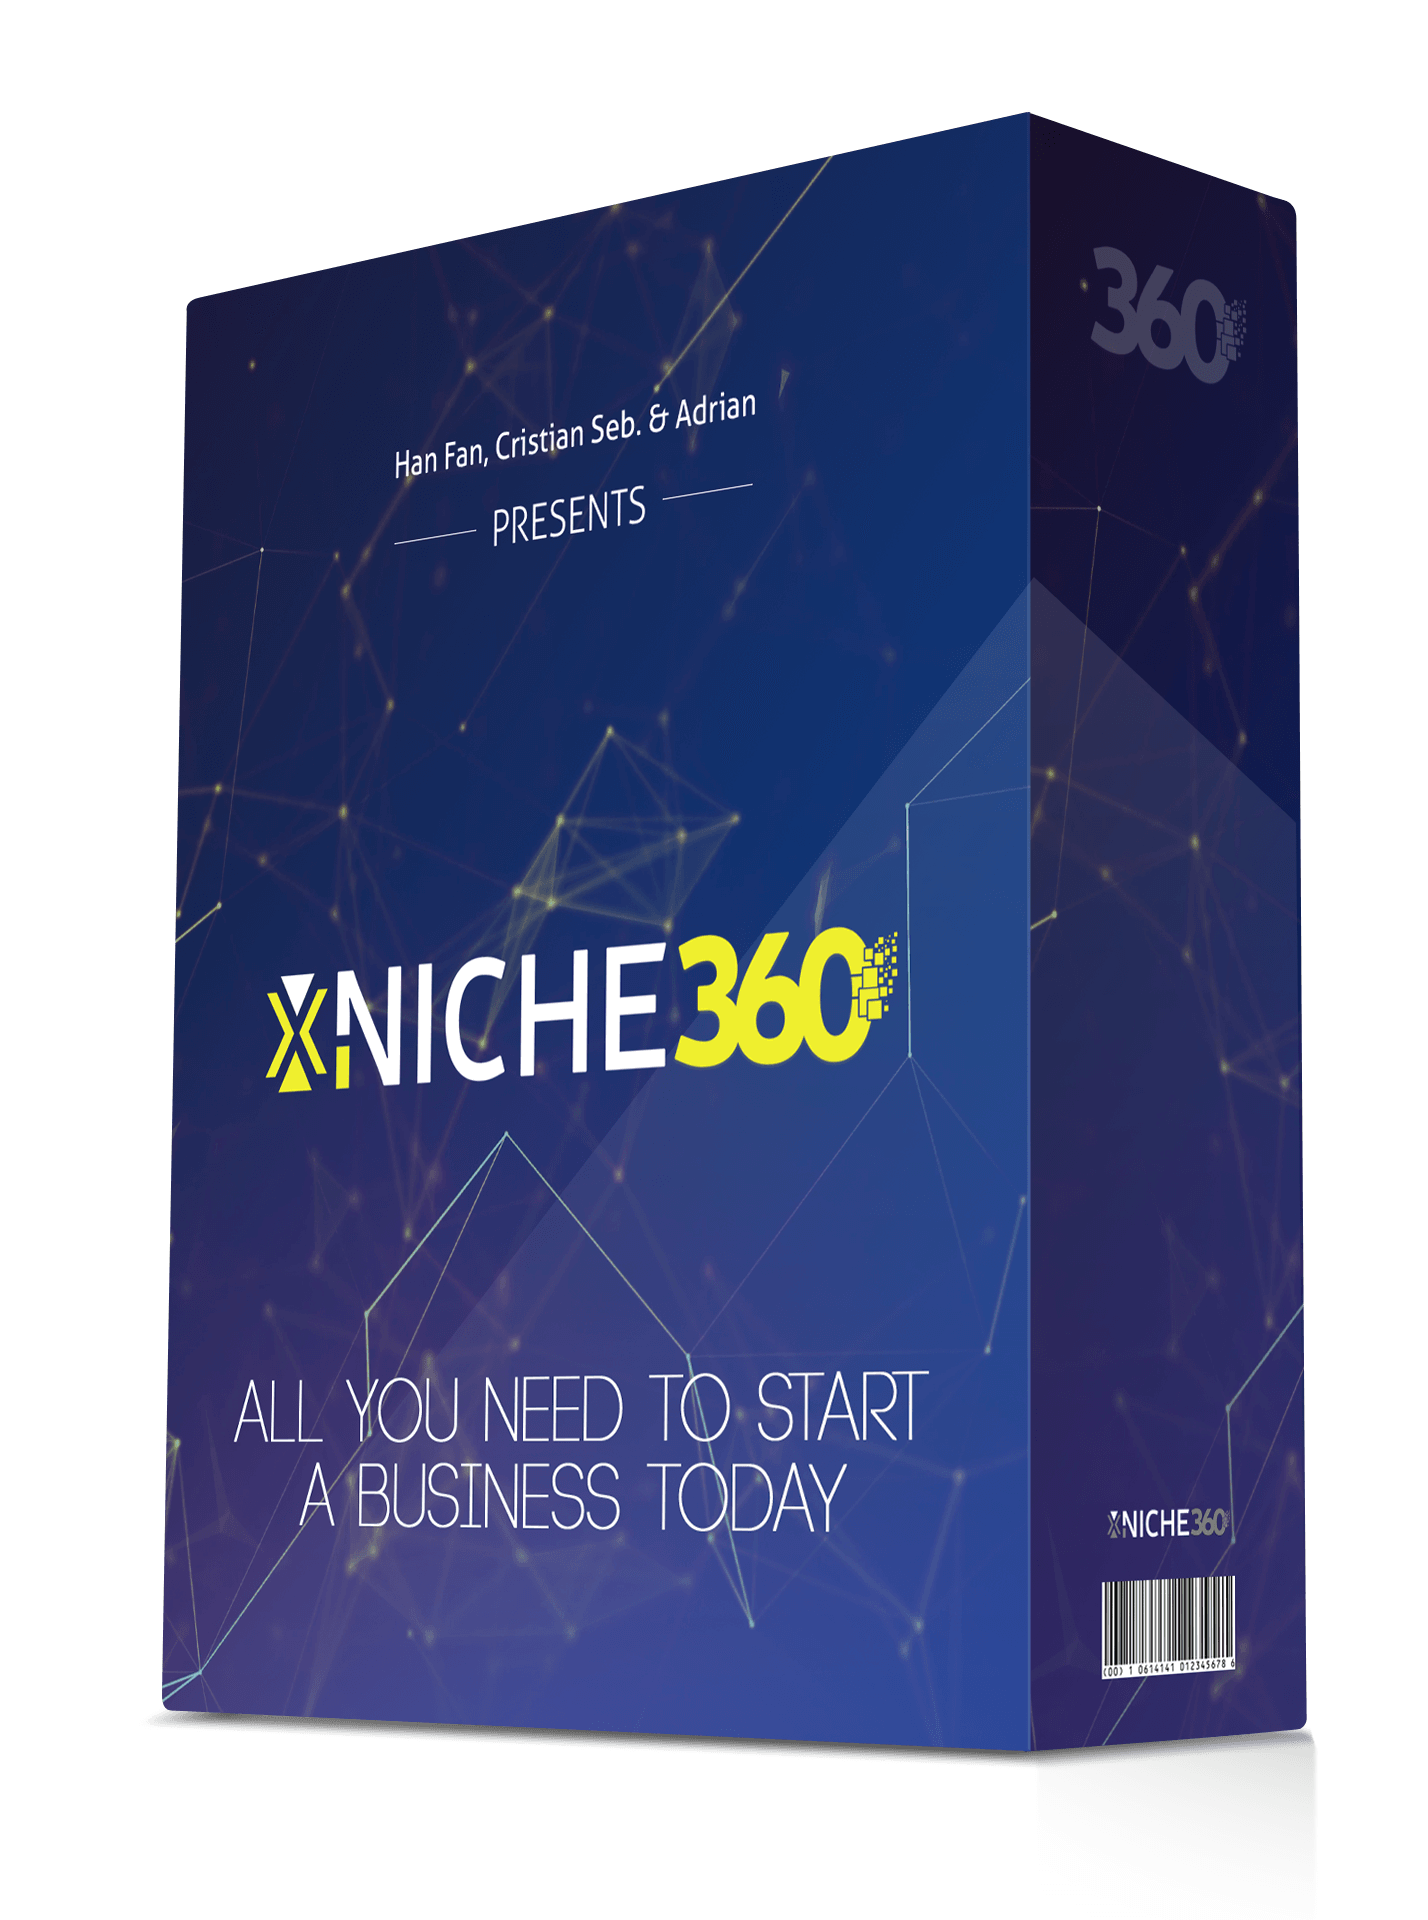 This Is The Easiest Way To FINALLY Make Money Online And Build A 6 Figure Business（XNiche360）